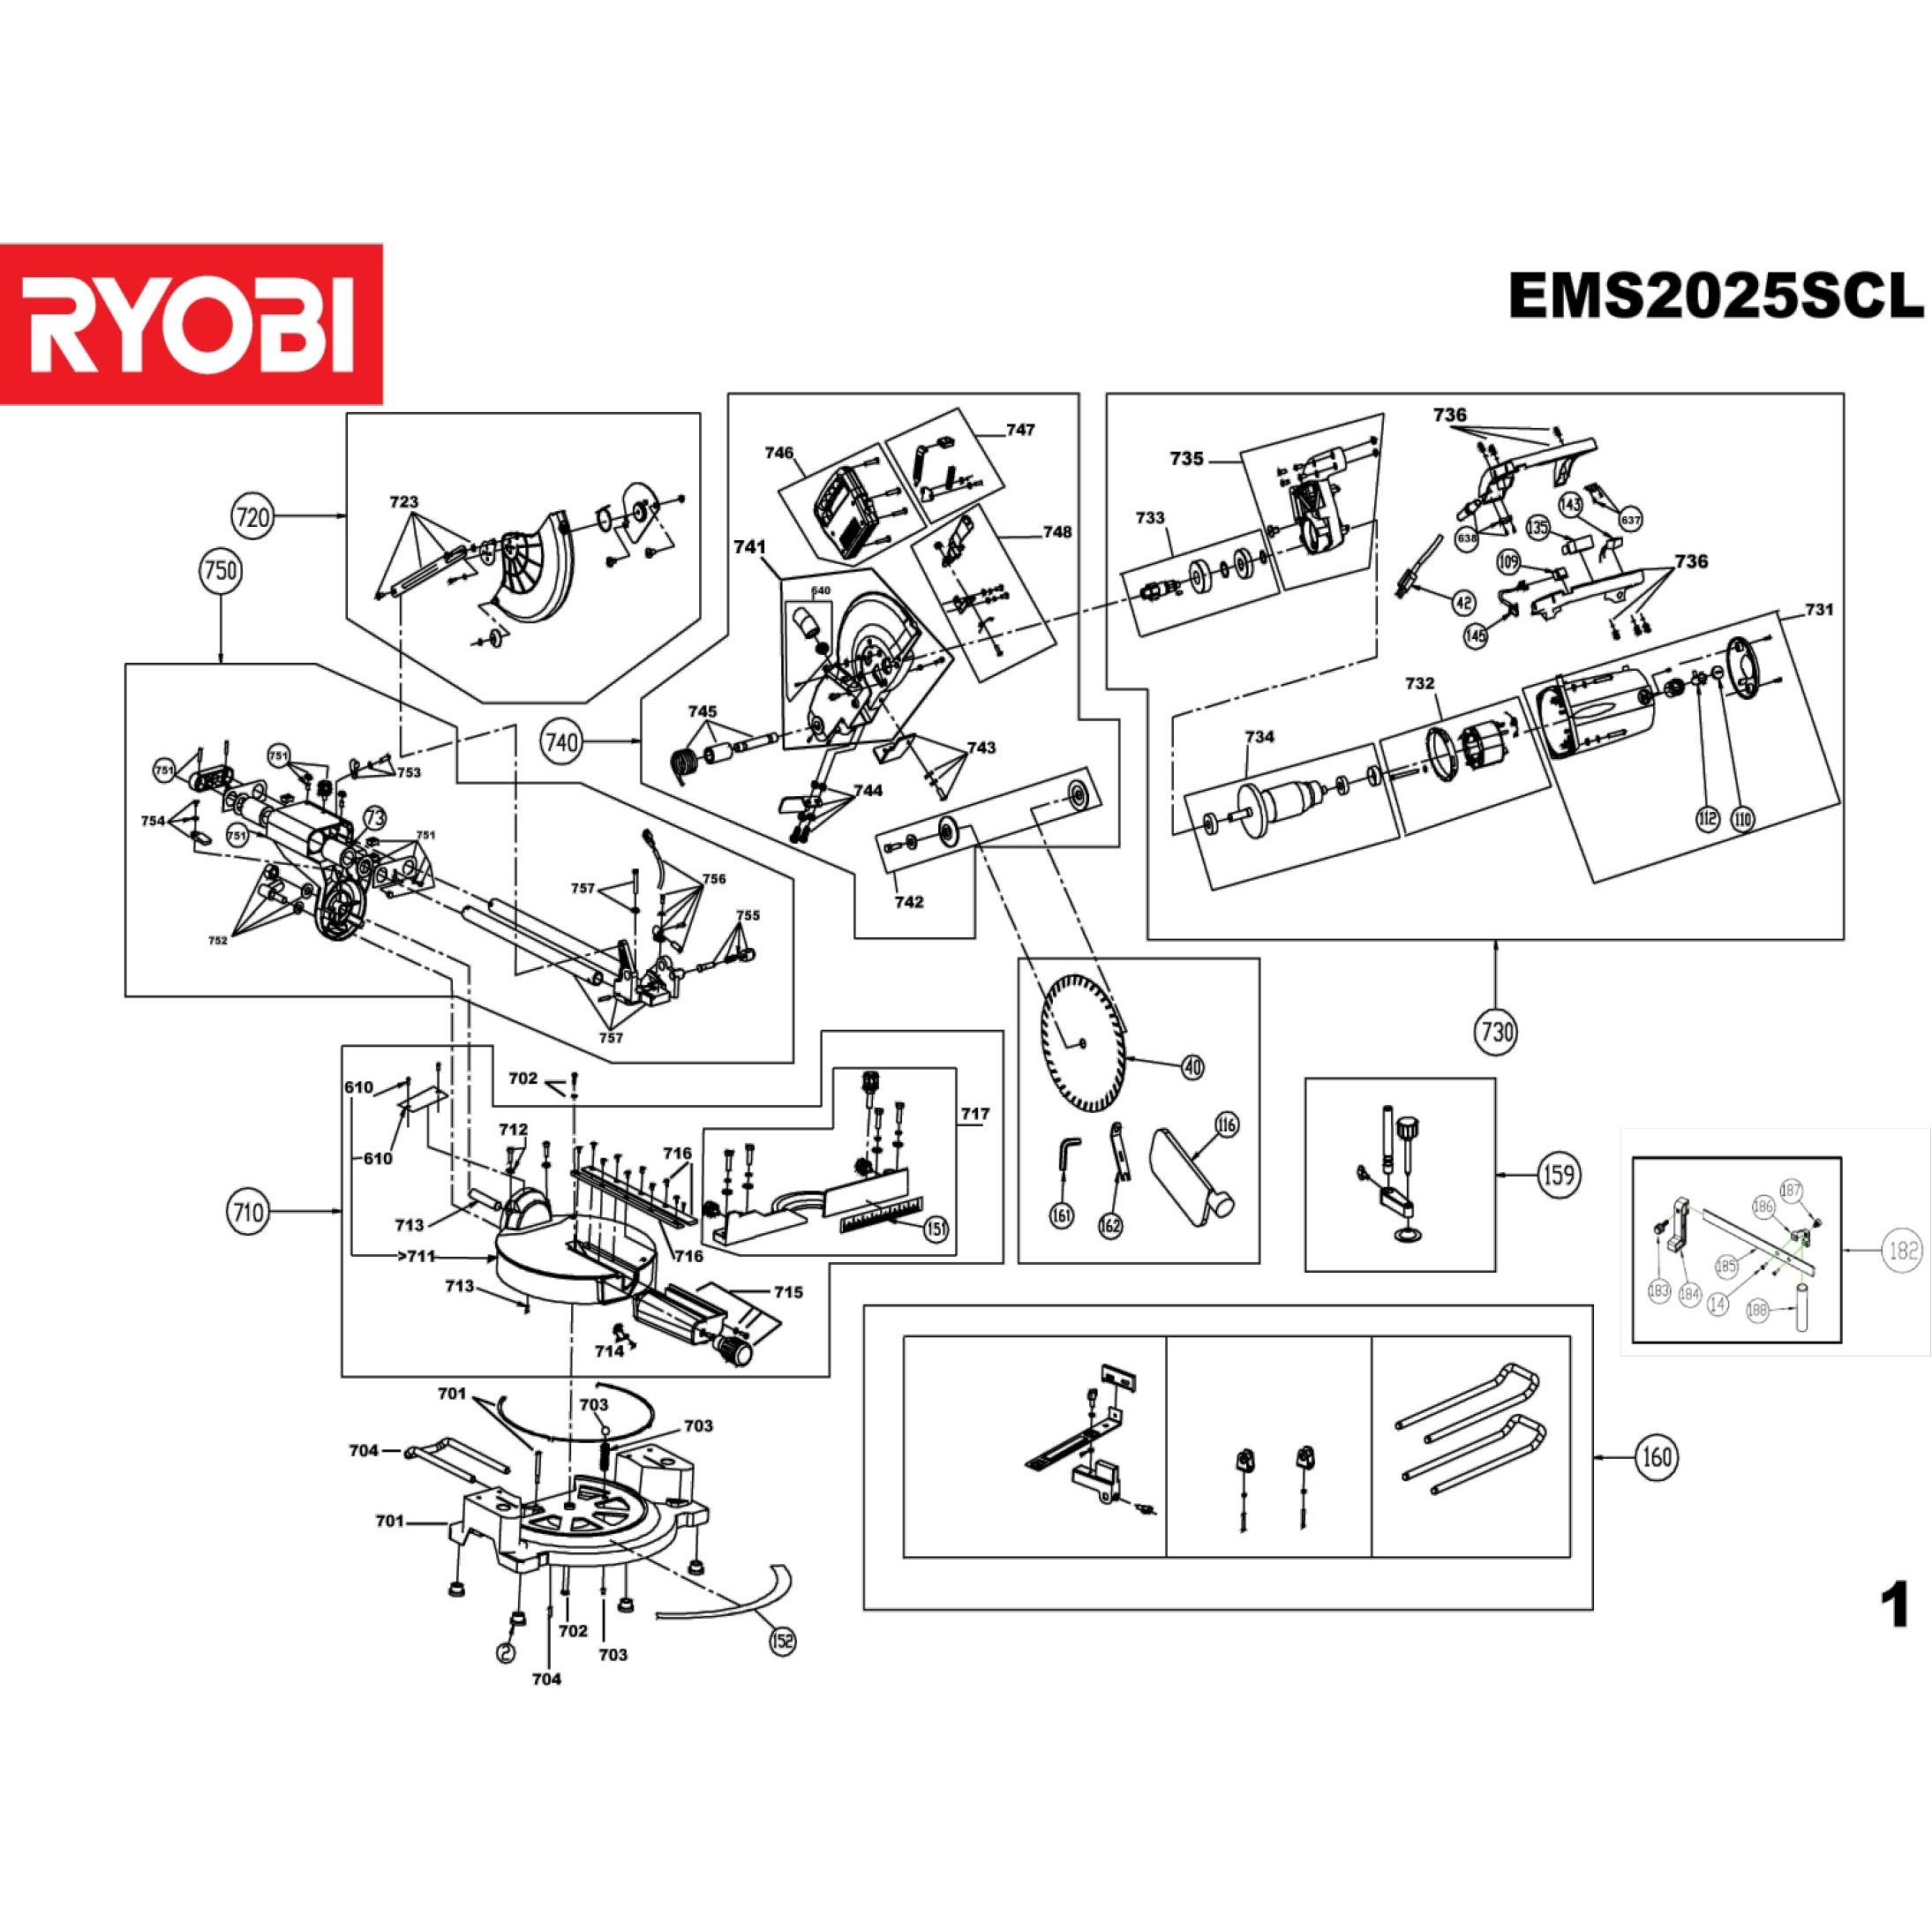 Buy A Ryobi Ems2025scl Spare Part Or Replacement Part For Your Saws And